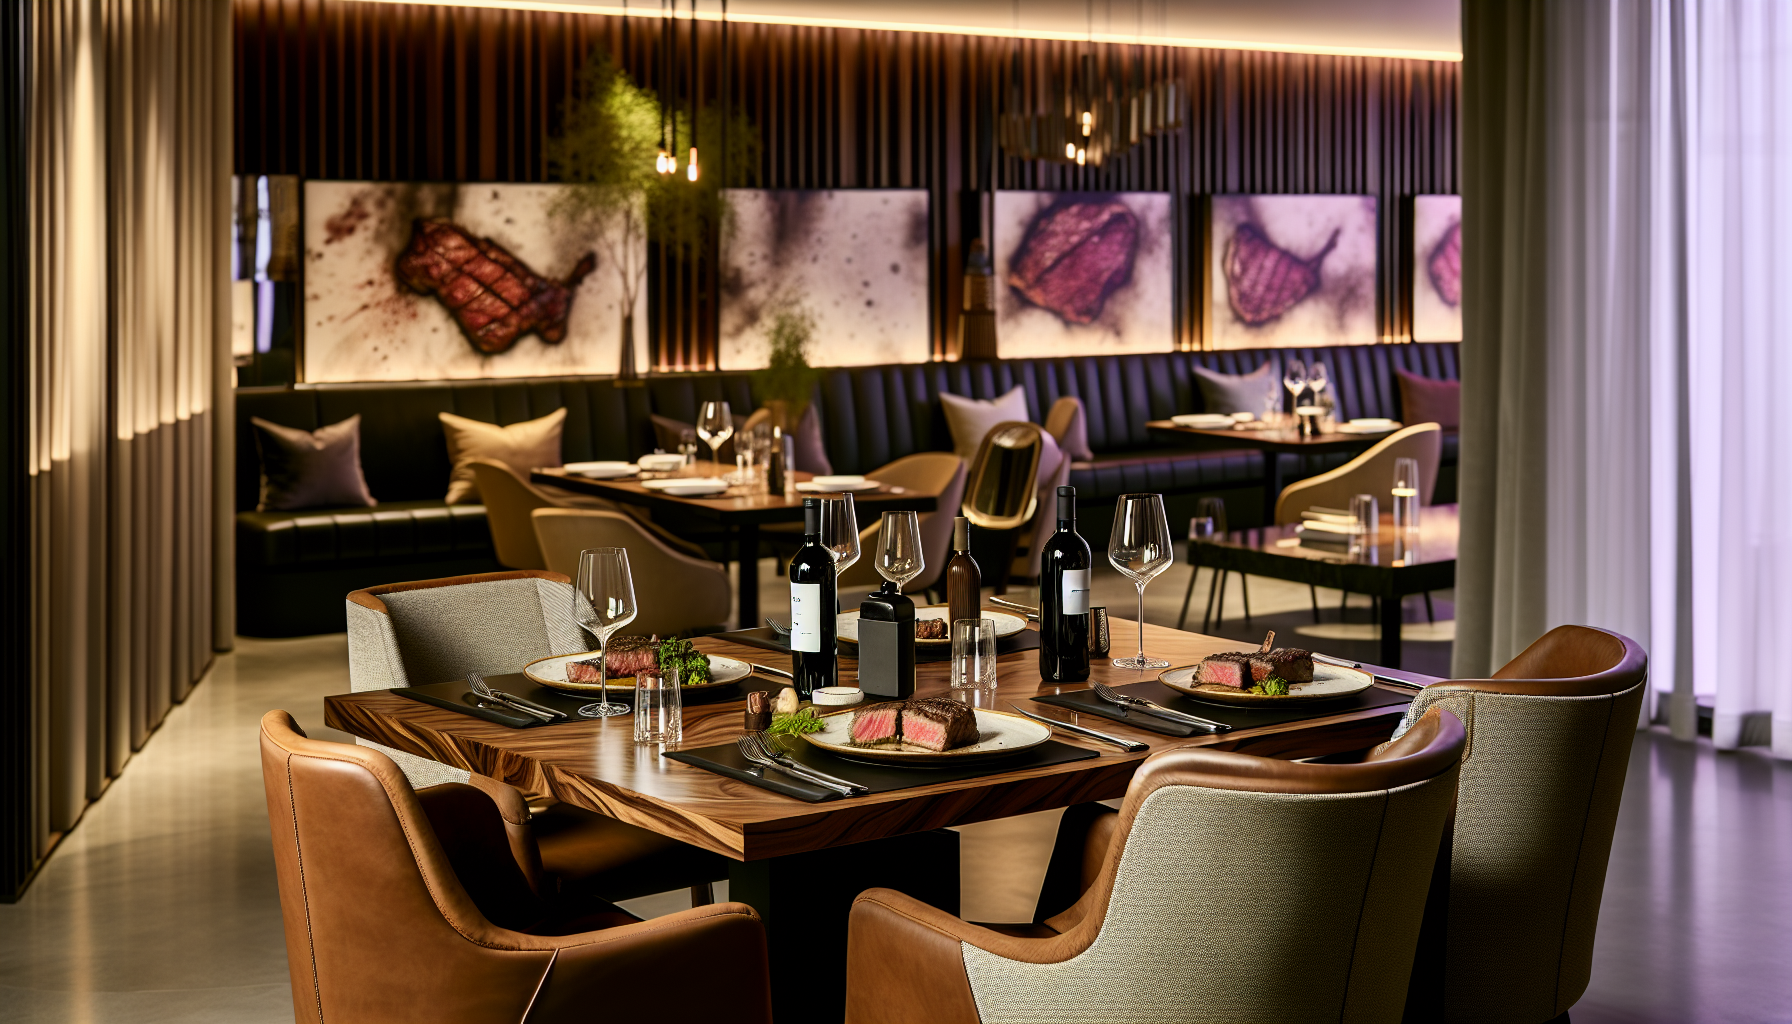 Luxurious dining experience at Steak 954